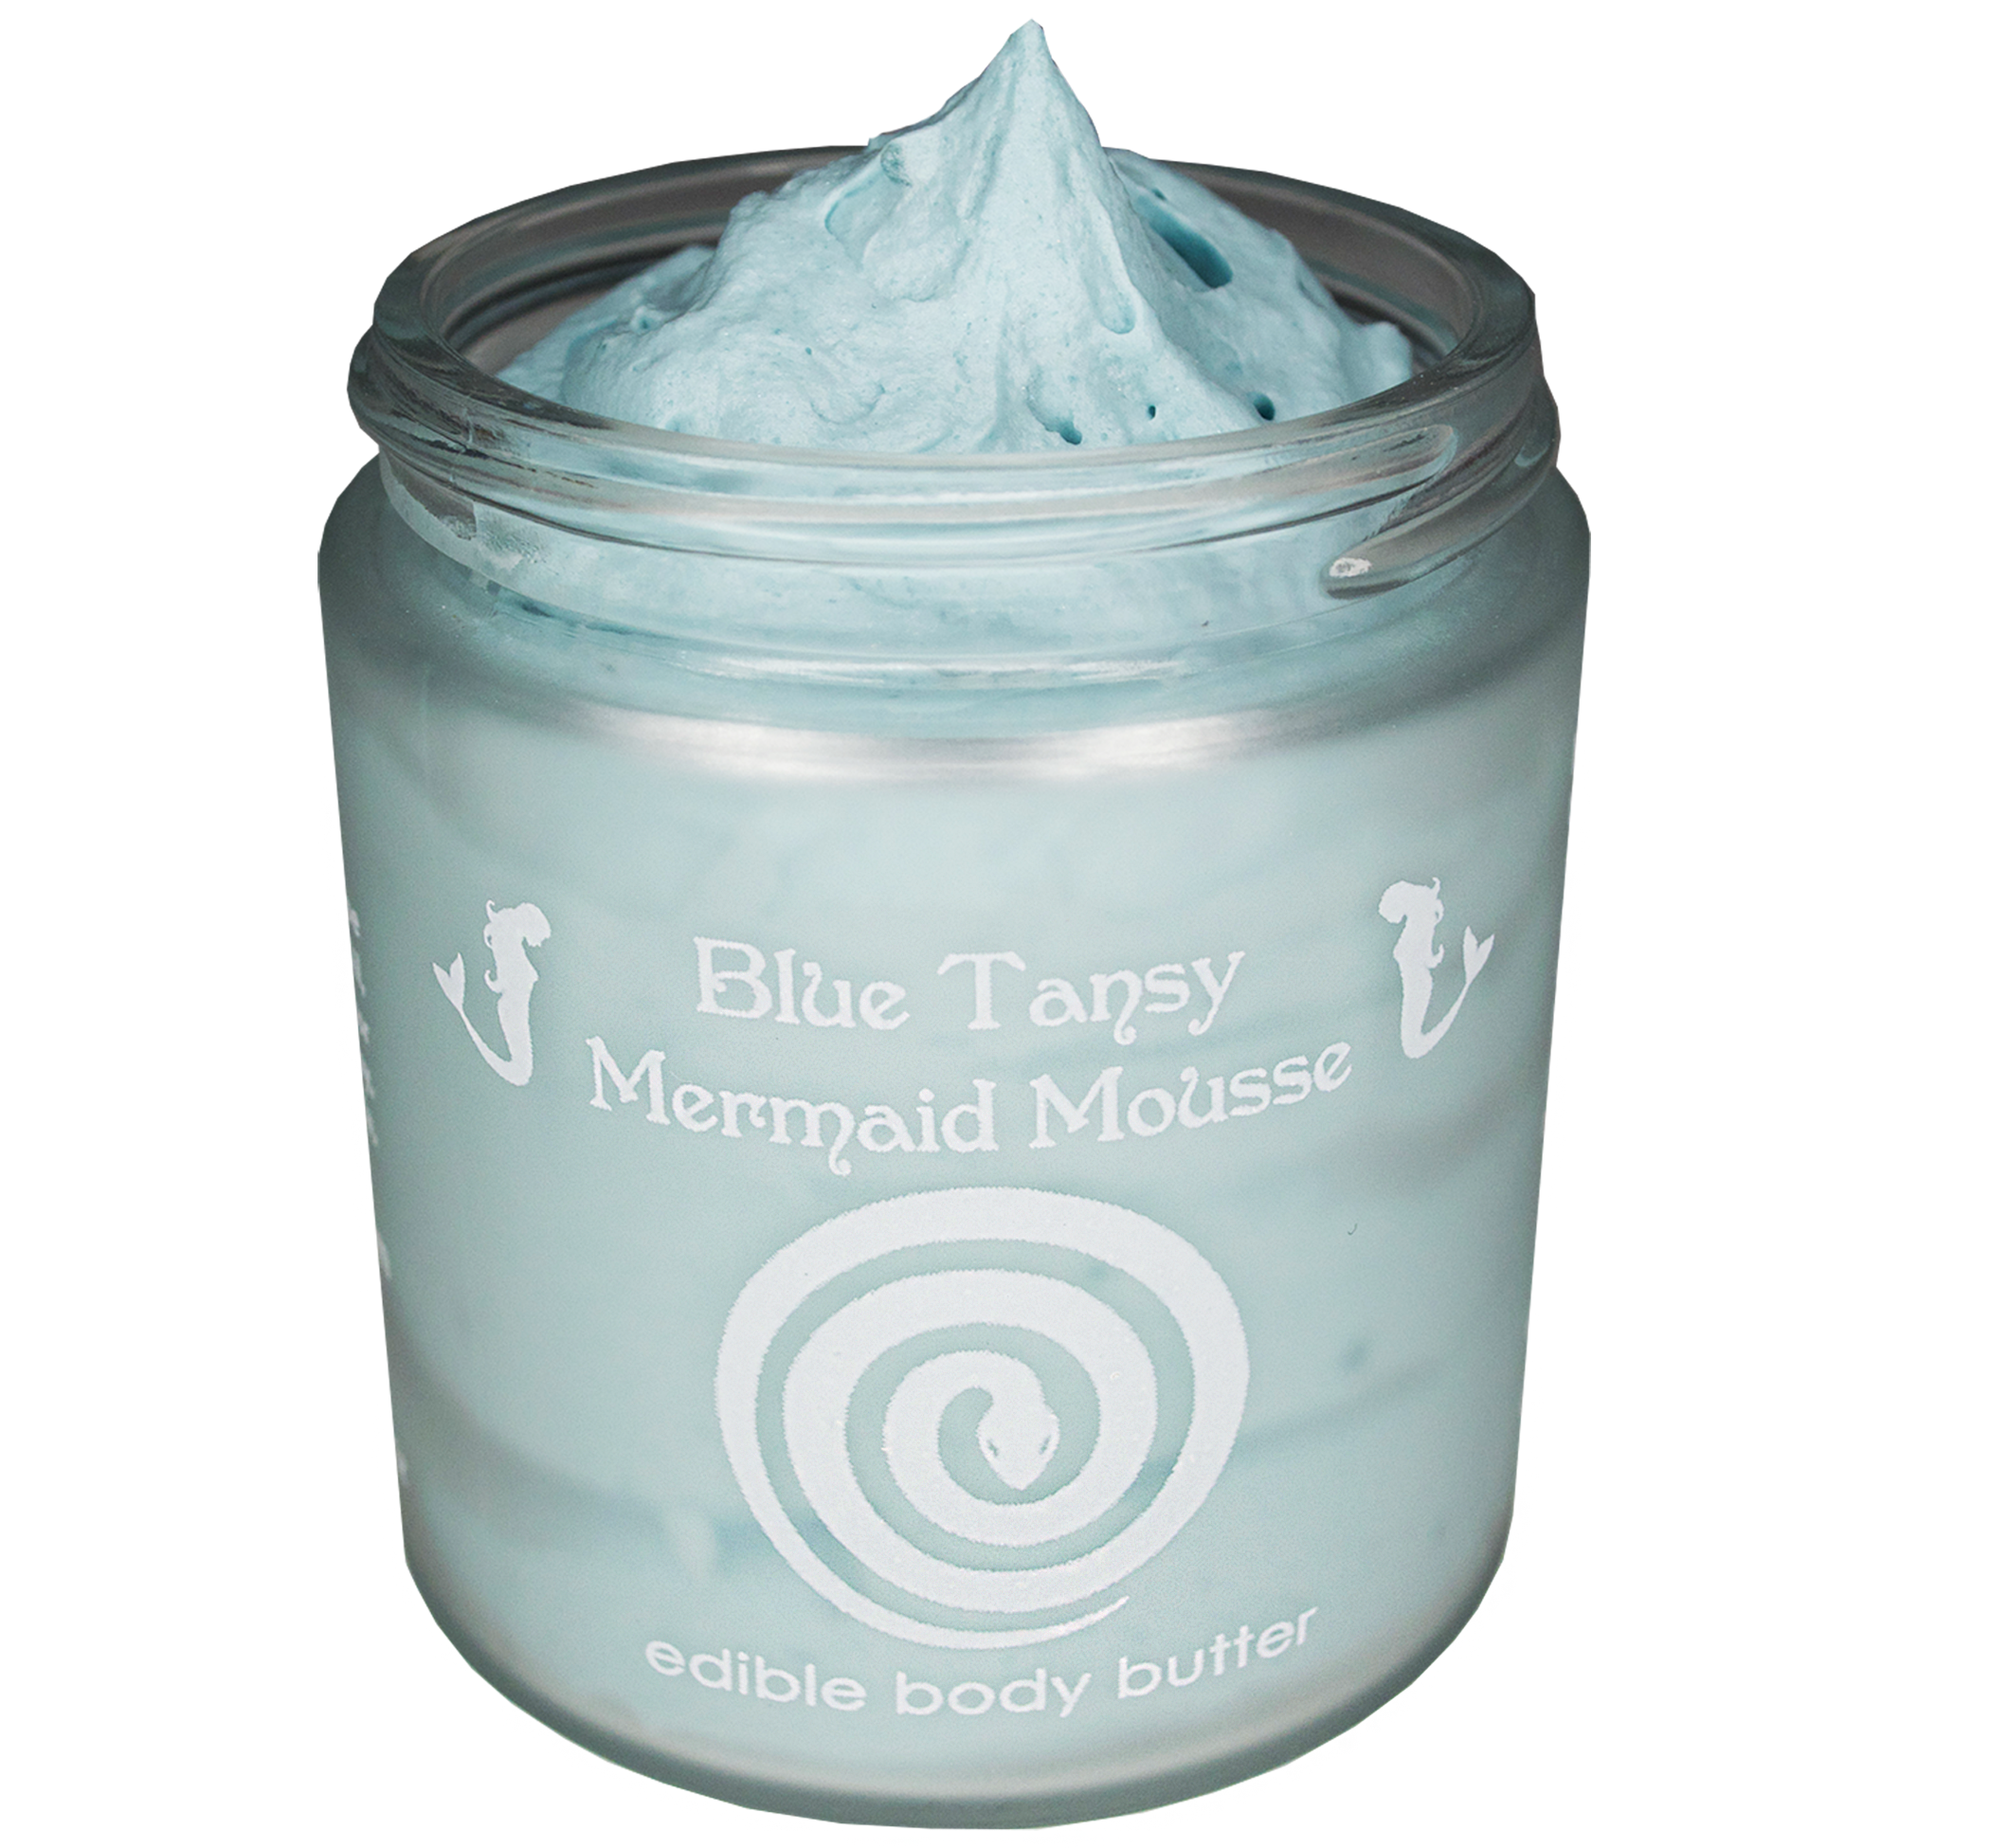 Mermaid Mousse ~ blue tansy organic body butter